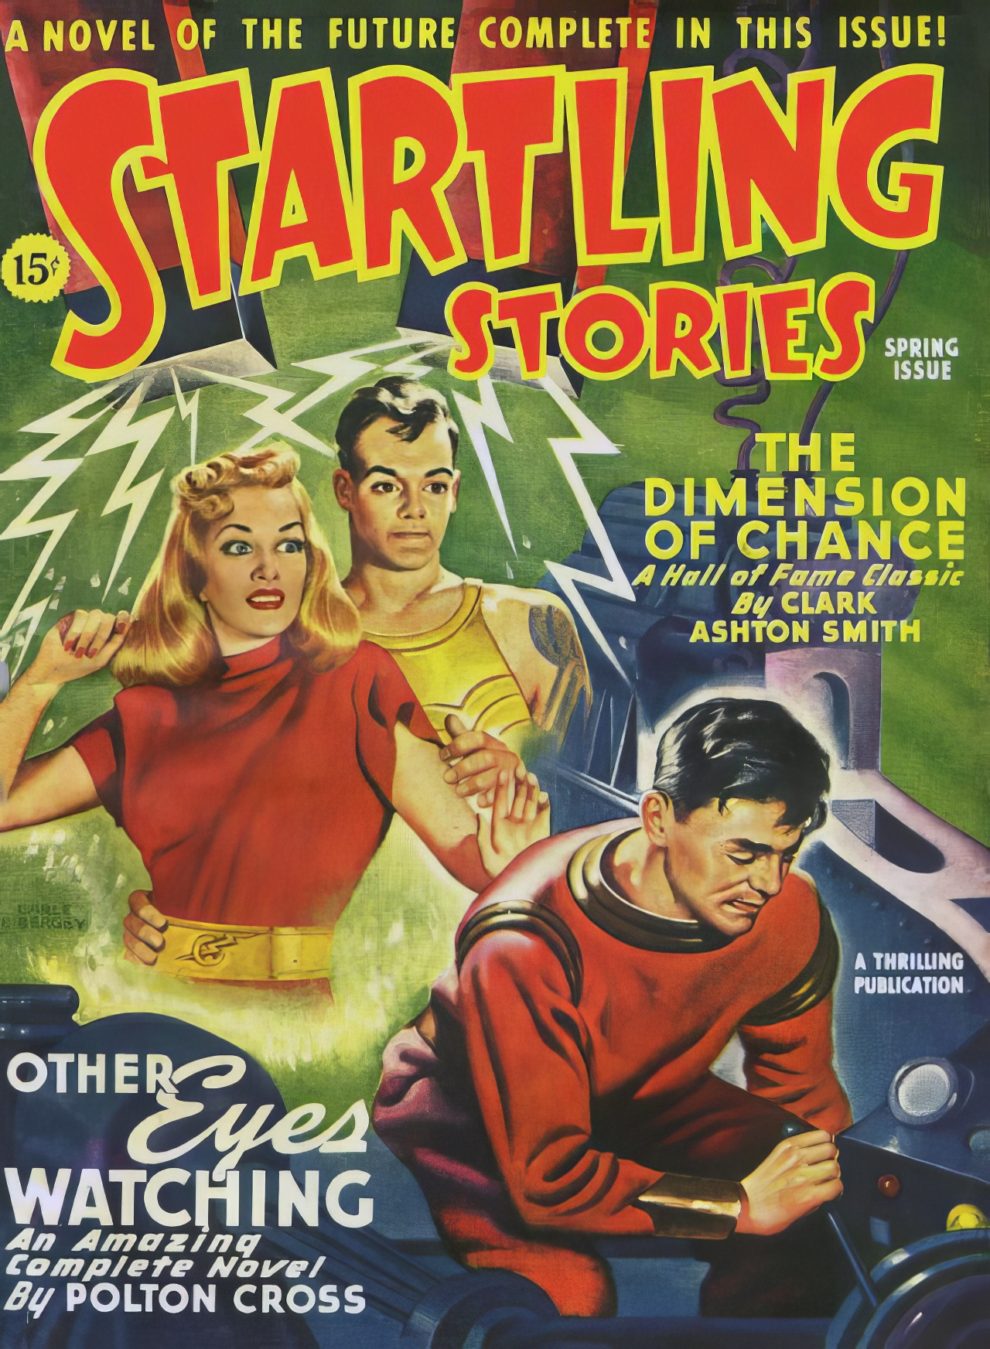 Startling Stories Covers 1940s 31 